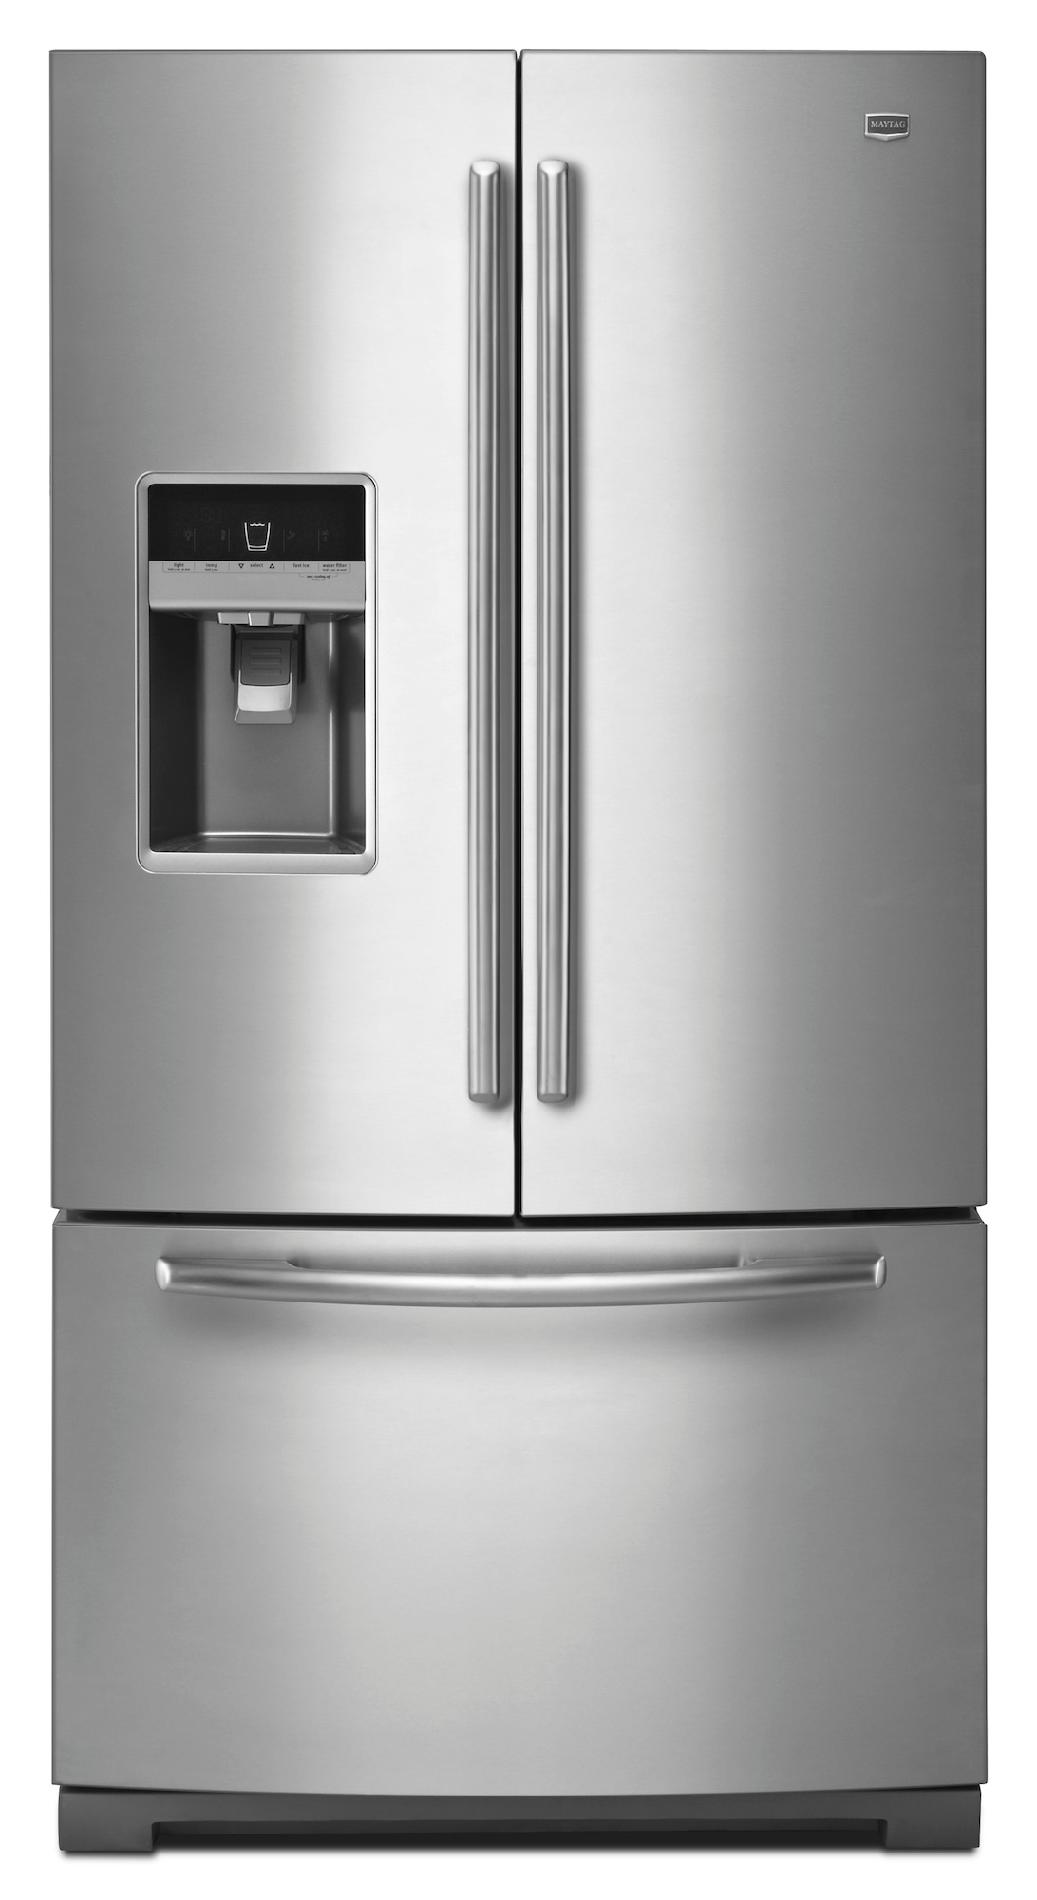 Discount Appliances in Dallas, Texas with Reviews